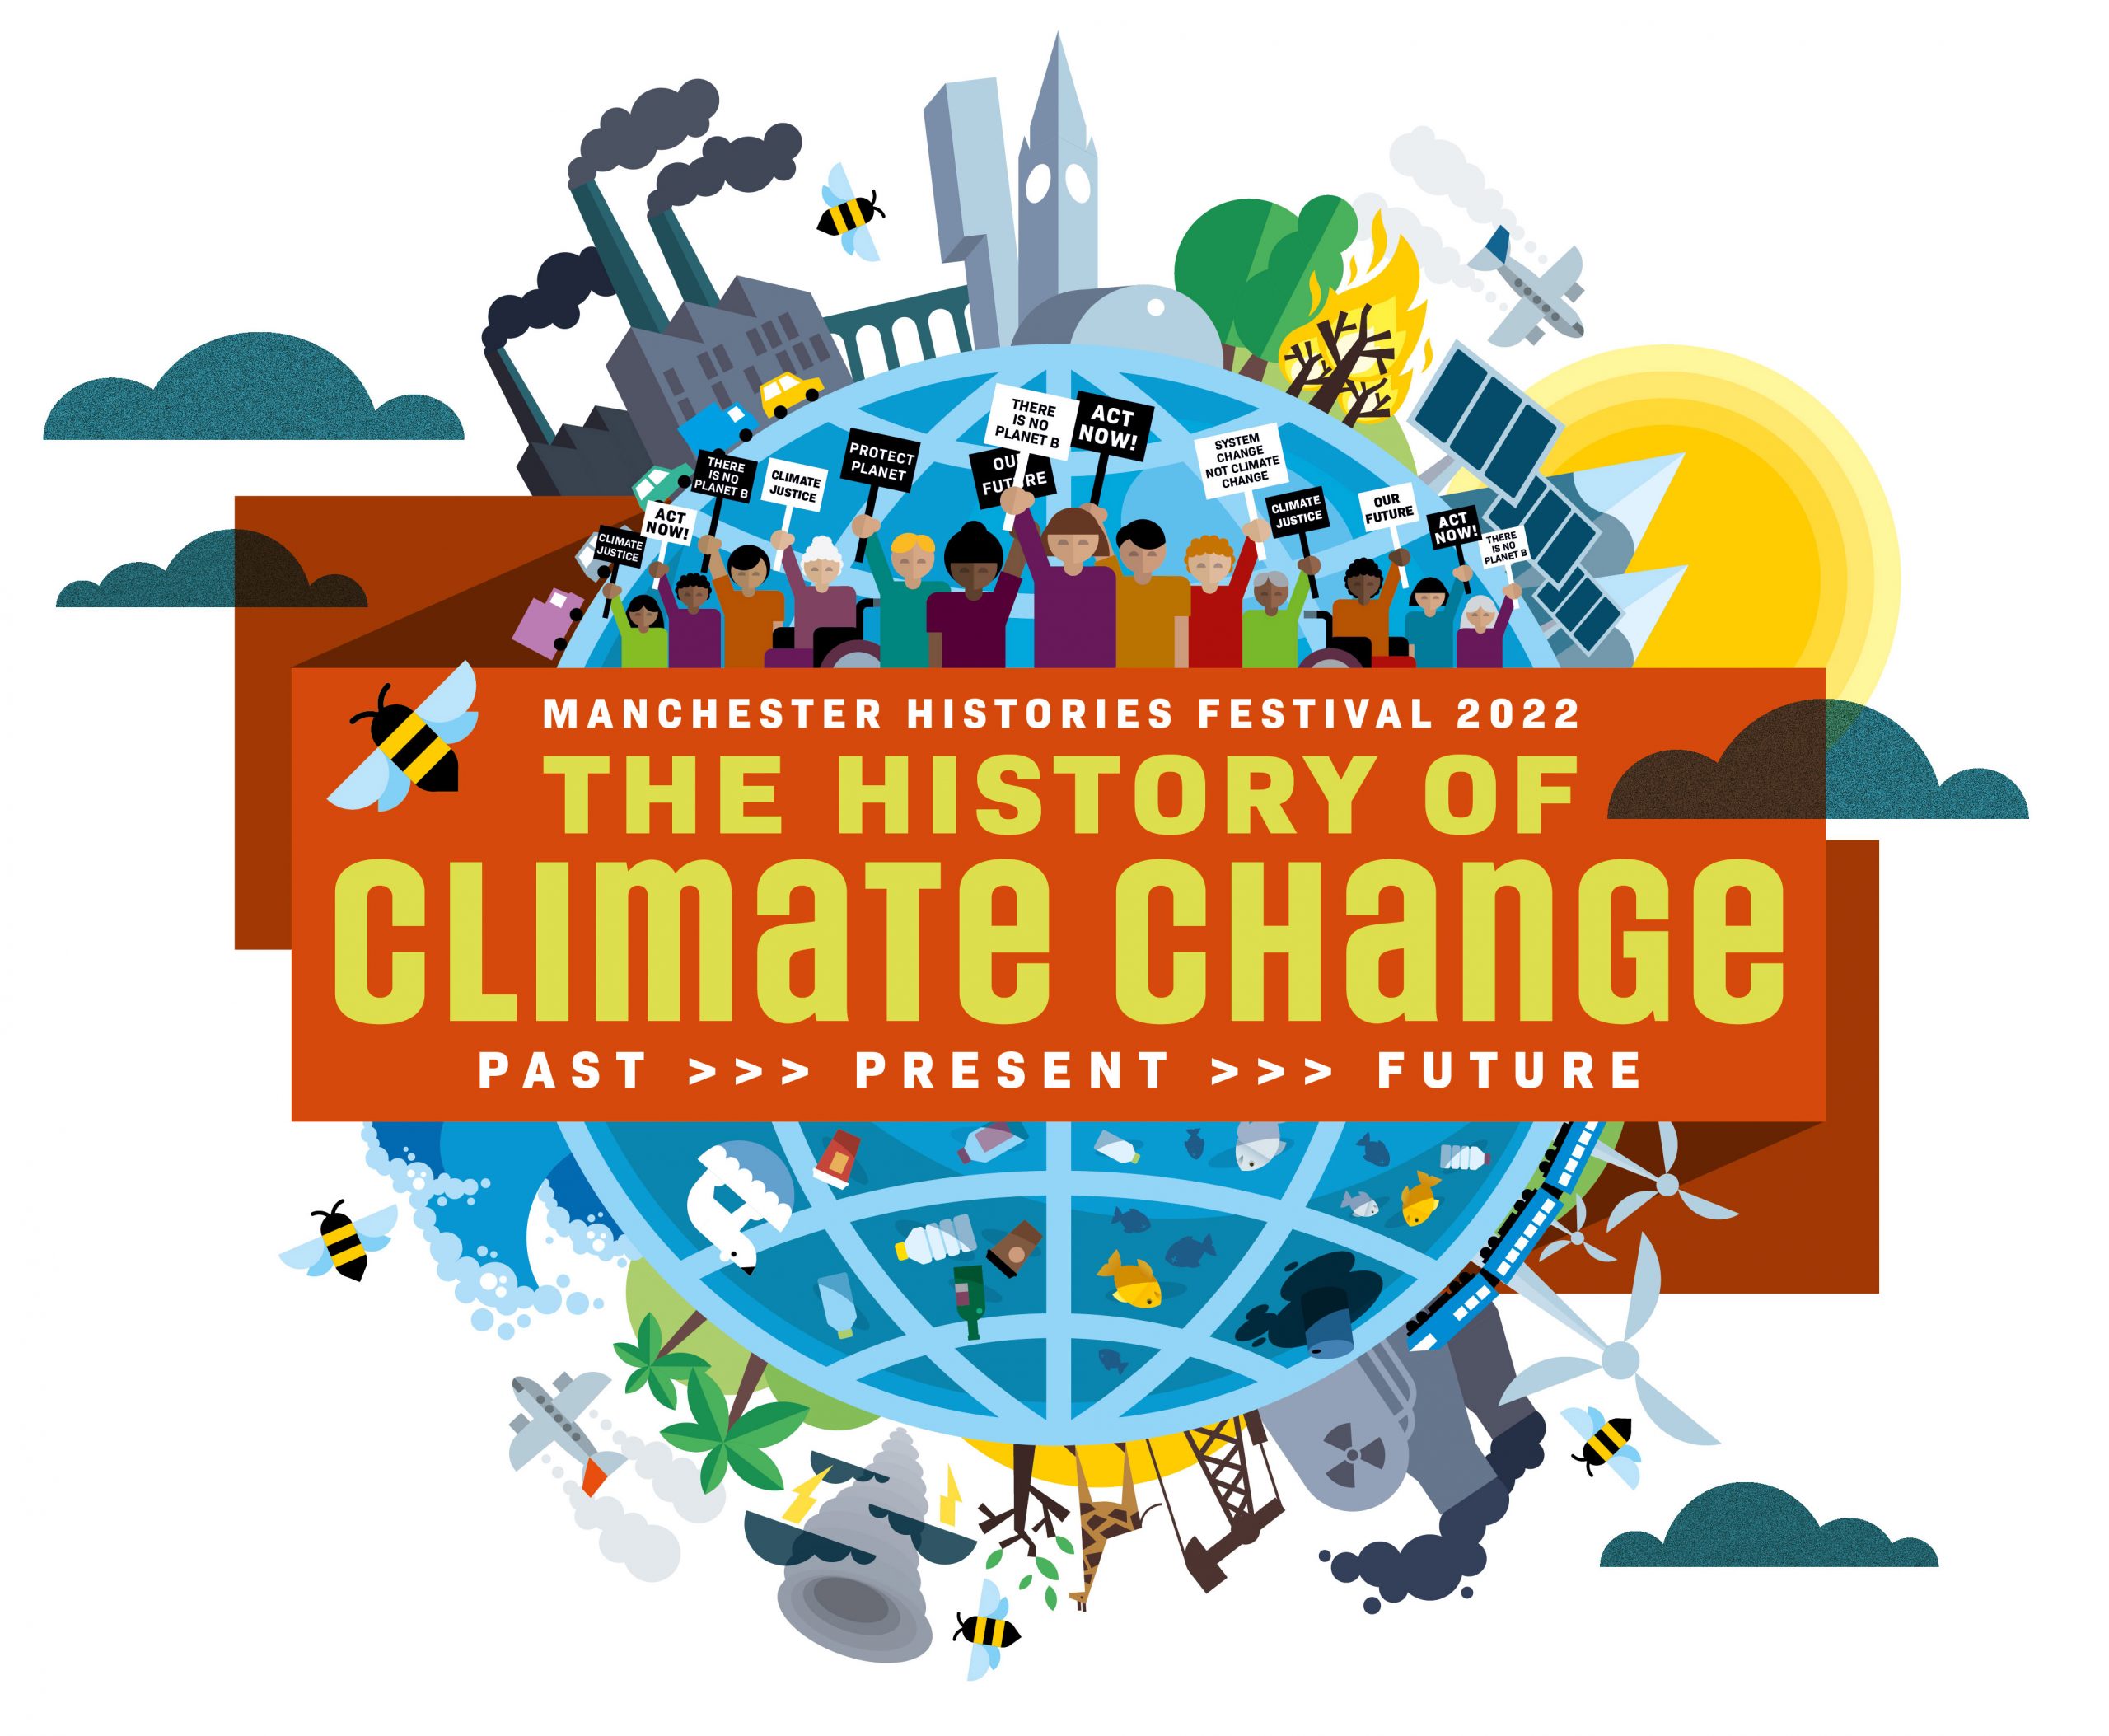 Manchester Histories Festival 2022 – The History of Climate Change